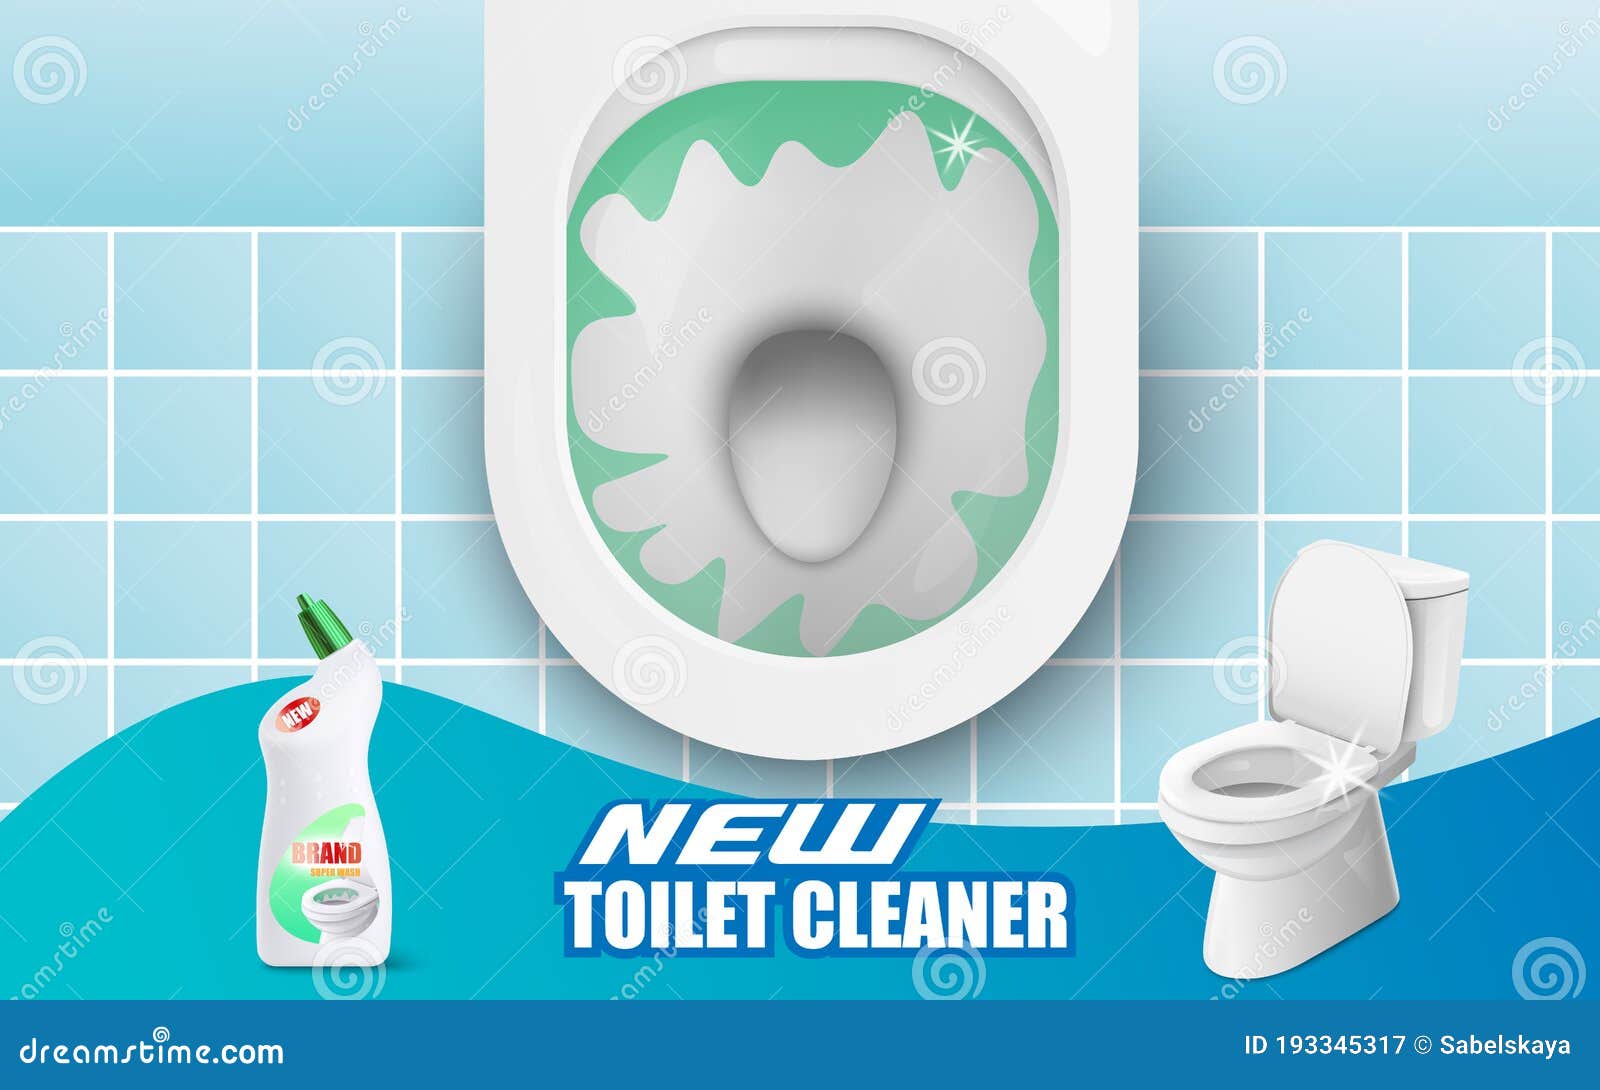 Banner Template of Toilet Cleaner with Lavatory, Realistic Vector  Illustration. Stock Vector - Illustration of background, banner: 193345317